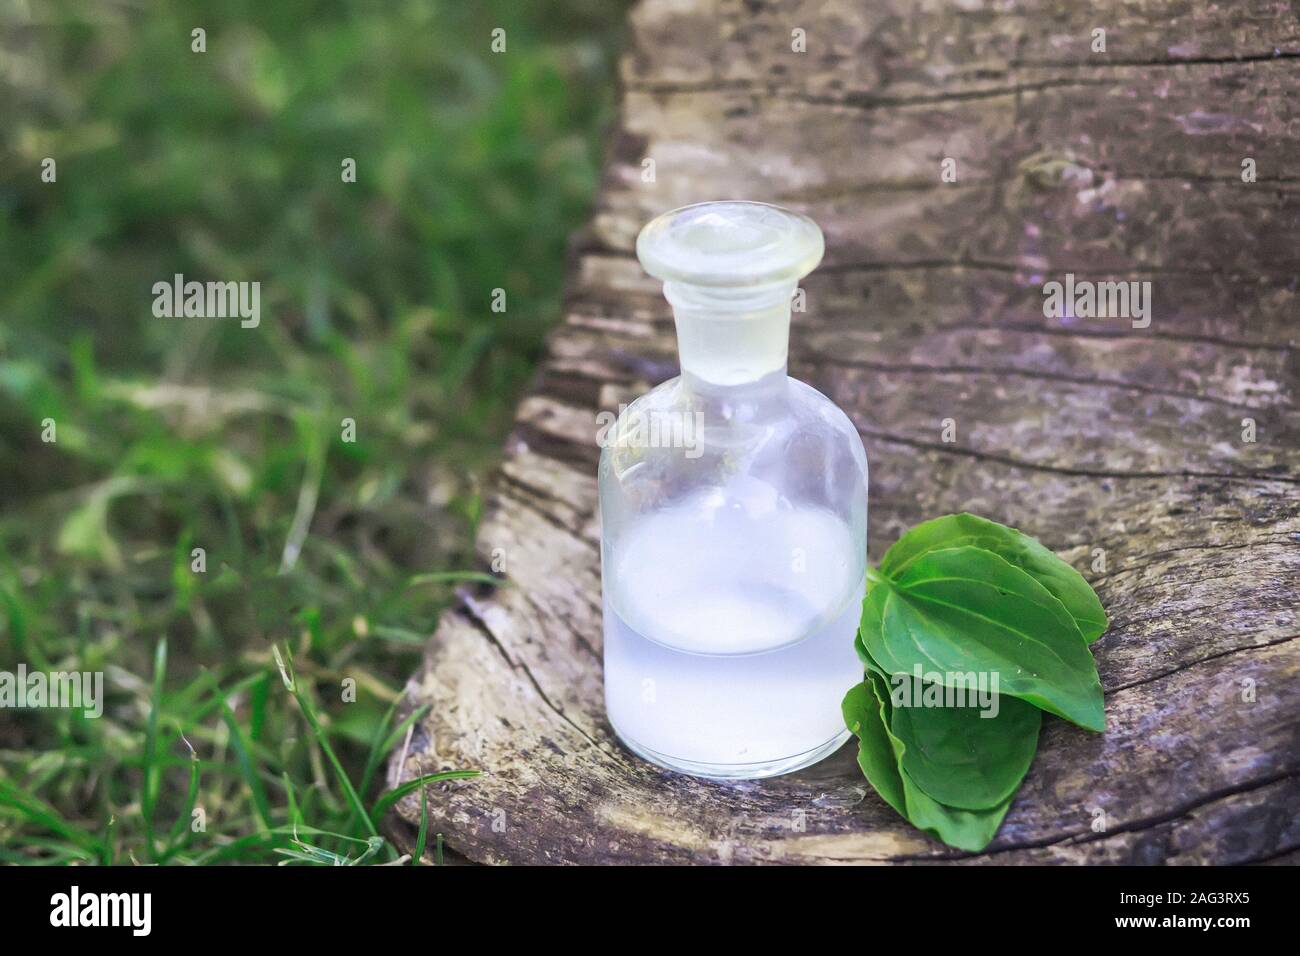 Greater plantain, Plantago, plantains or fleaworts green leaves next to clear bottle with an elixir cork. bottle of medicine on stump in forest on a b Stock Photo